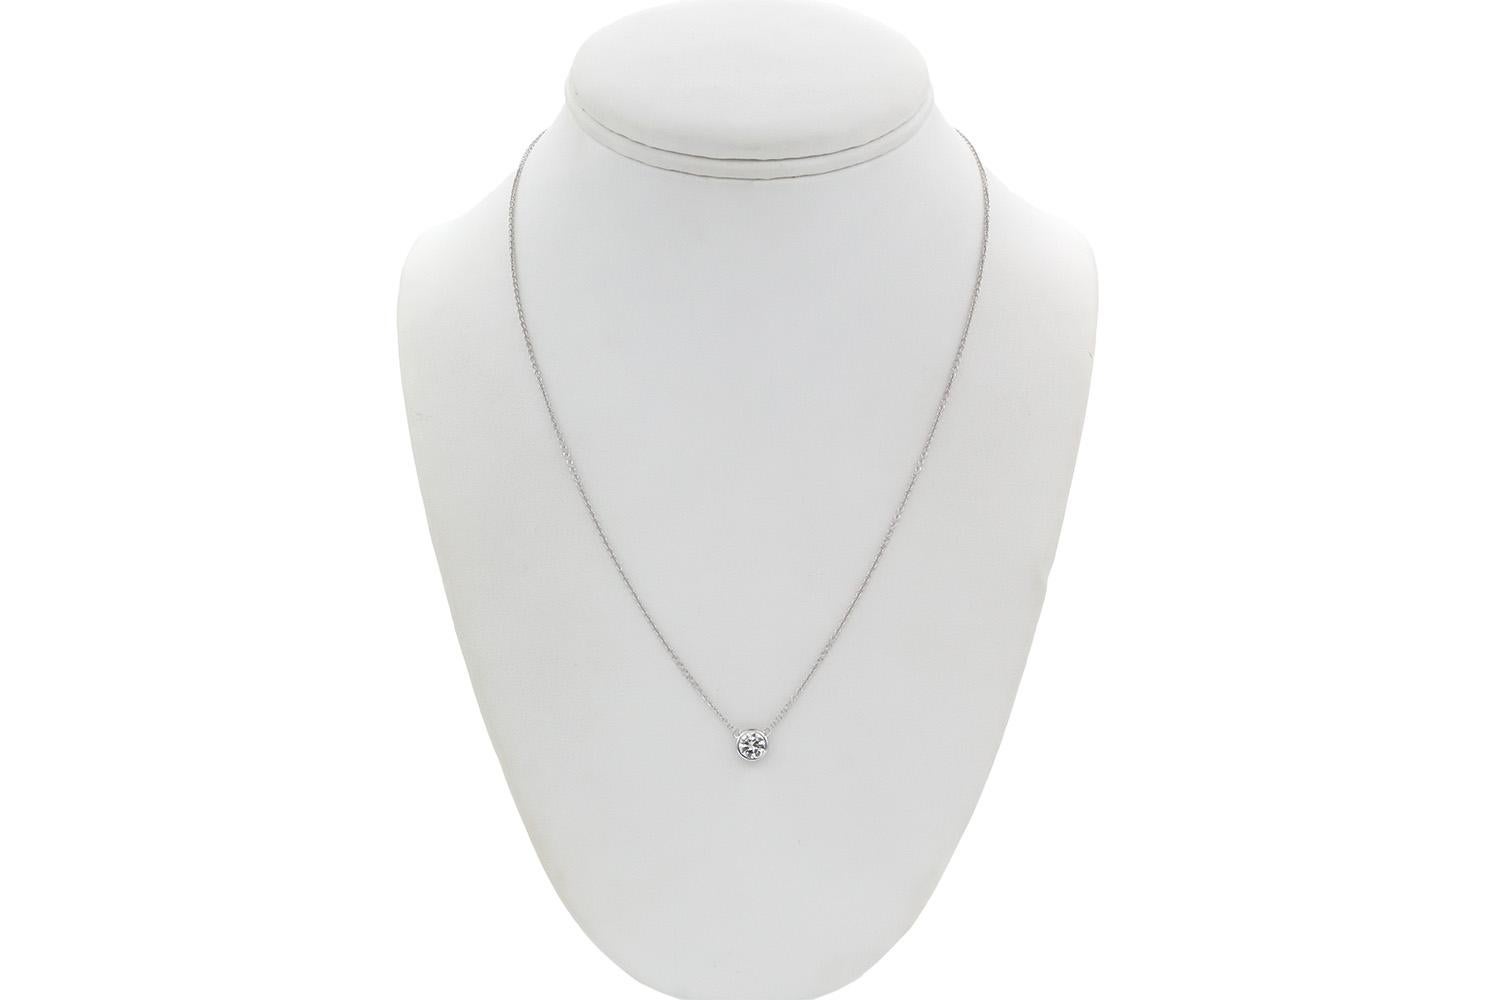 We are pleased to present this EGL Certified 14k White Gold & Diamond Bezel Set Pendant Necklace. This cute piece features an EGL certified 0.93ct G/SI1 round brilliant cut diamond pendant bezel set on a 14k white gold chain. The chain is 18.25